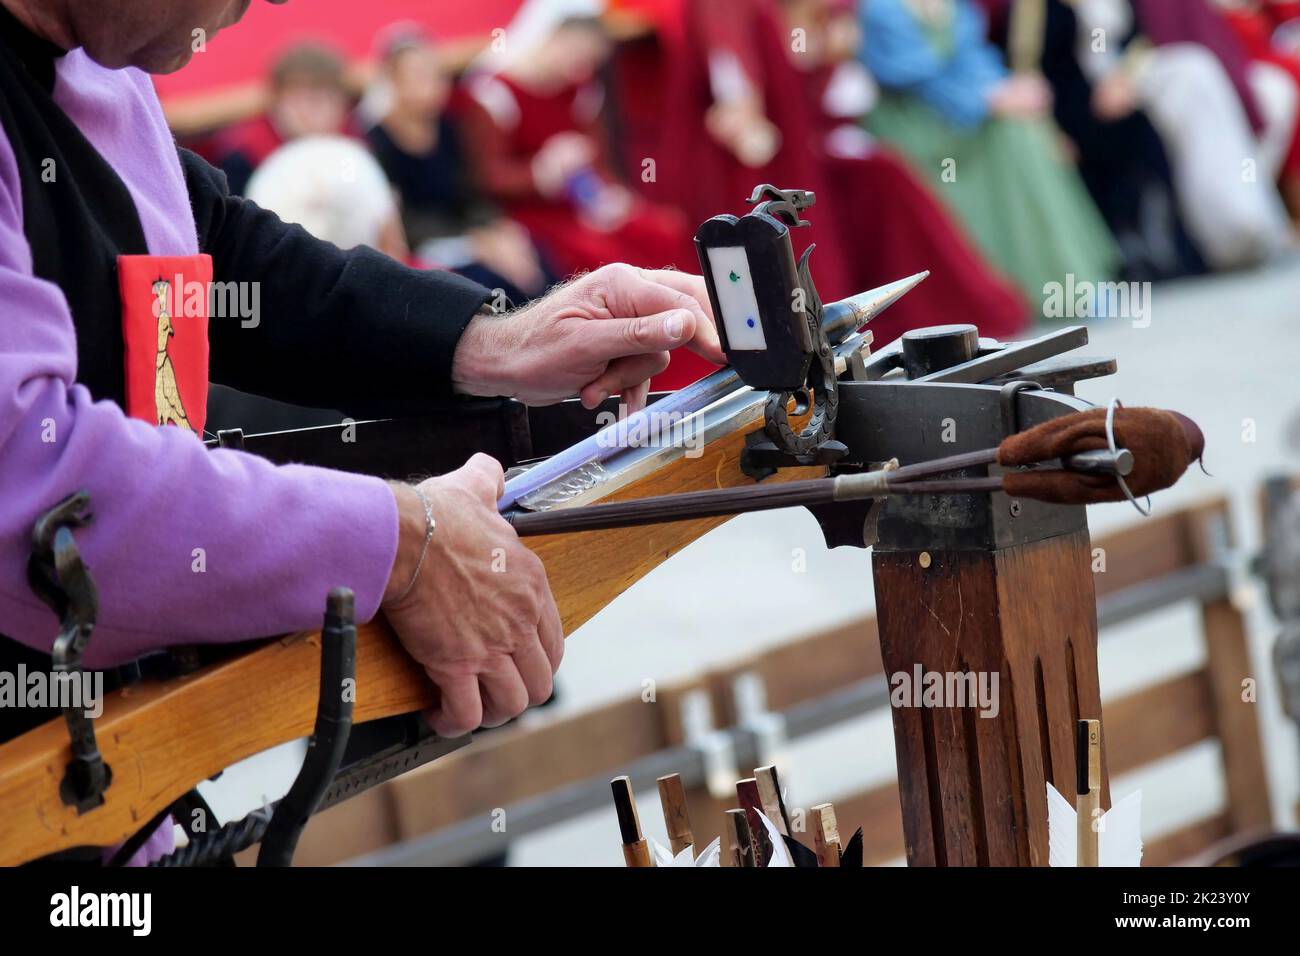 Italy, Sansepolcro (Arezzo), september 11, 2022 : Palio of Crossbow (Palio della Balestra). It is a historical event that has been held continuously s Stock Photo